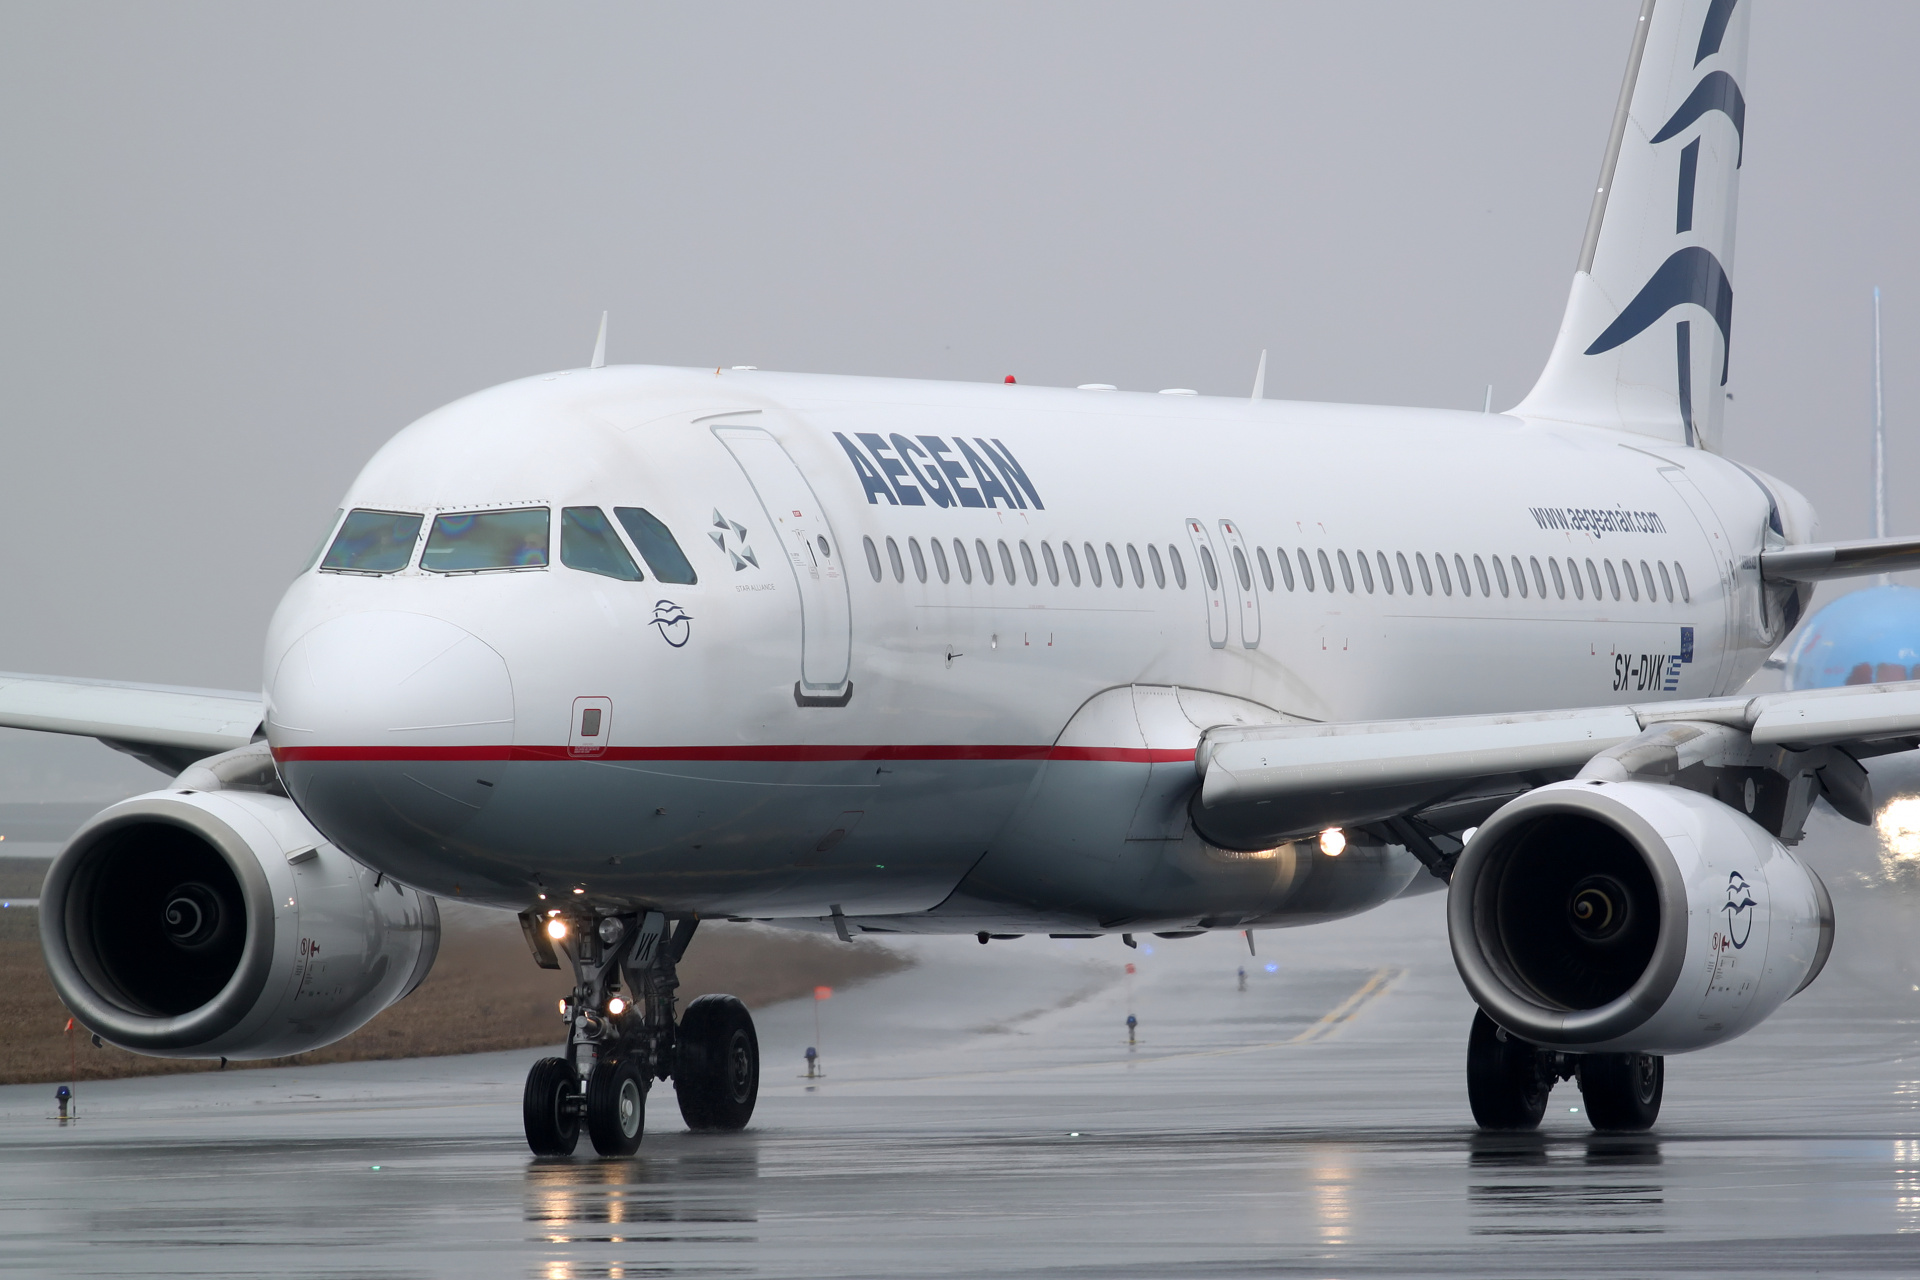 SX-DVK (Aircraft » EPWA Spotting » Airbus A320-200 » Aegean Airlines)